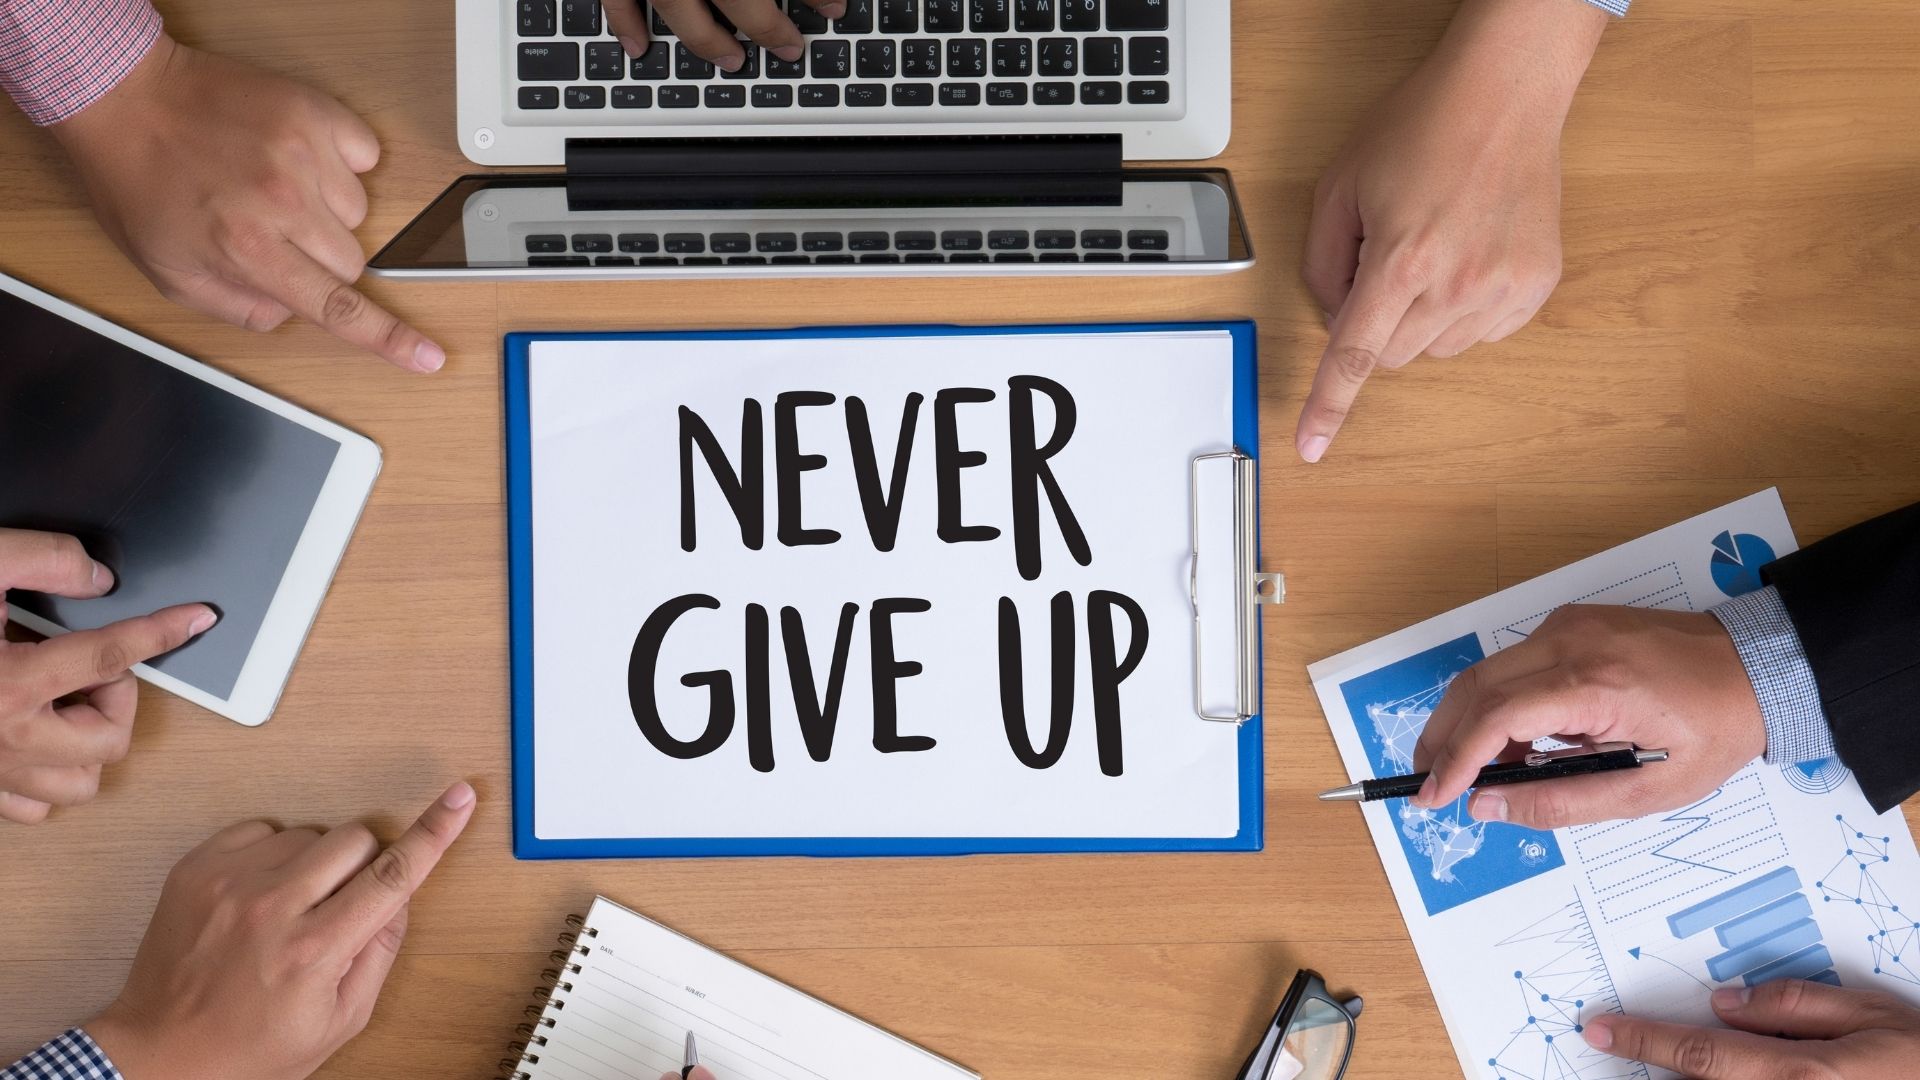 10 Reasons Why Giving Up Shouldn’t Be an Option